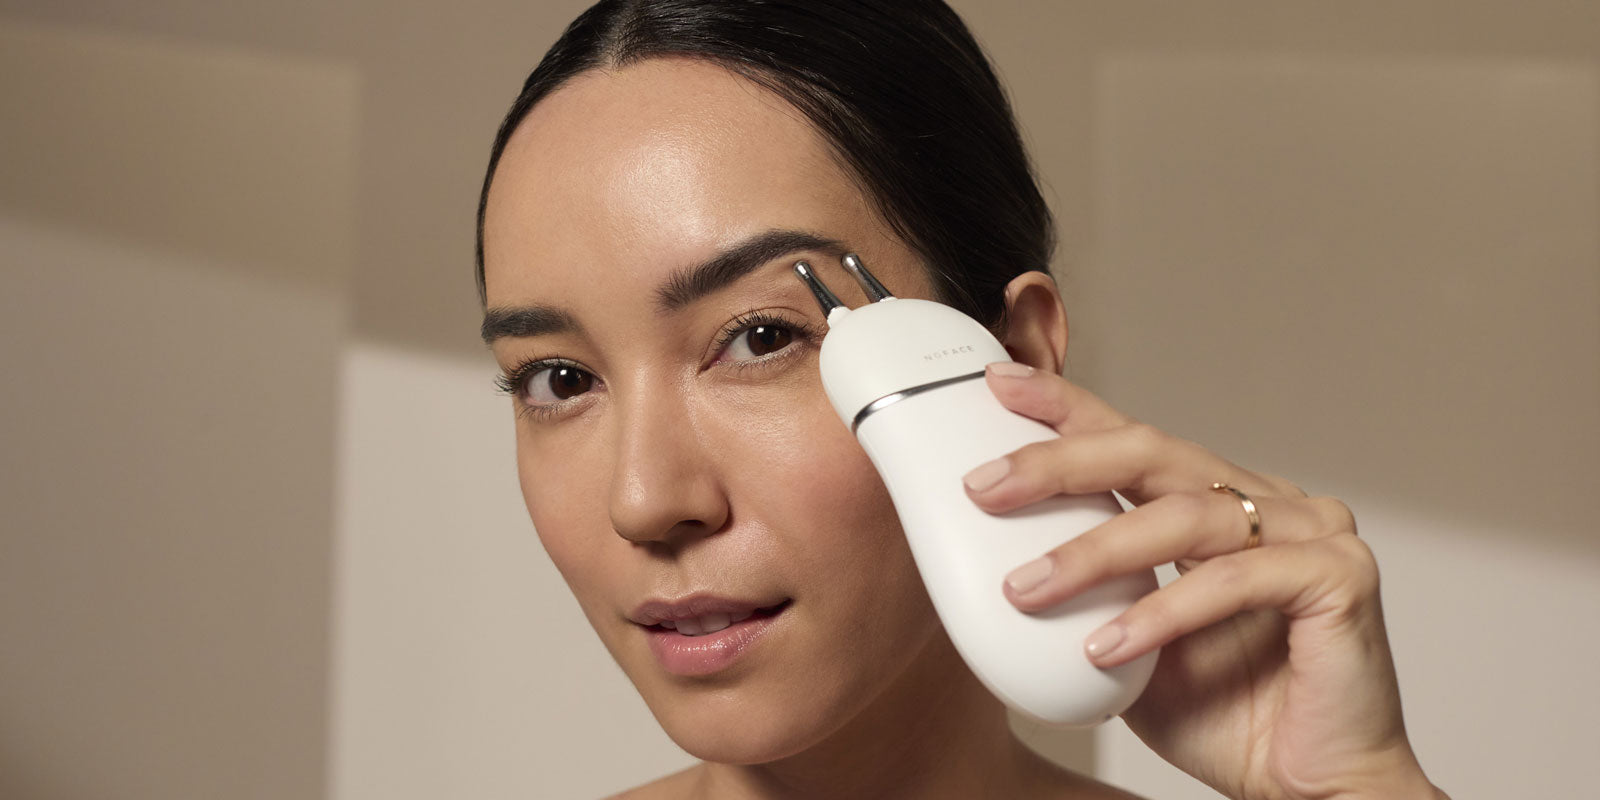 What Is a Brow Lift & How To Lift Brows With Microcurrent